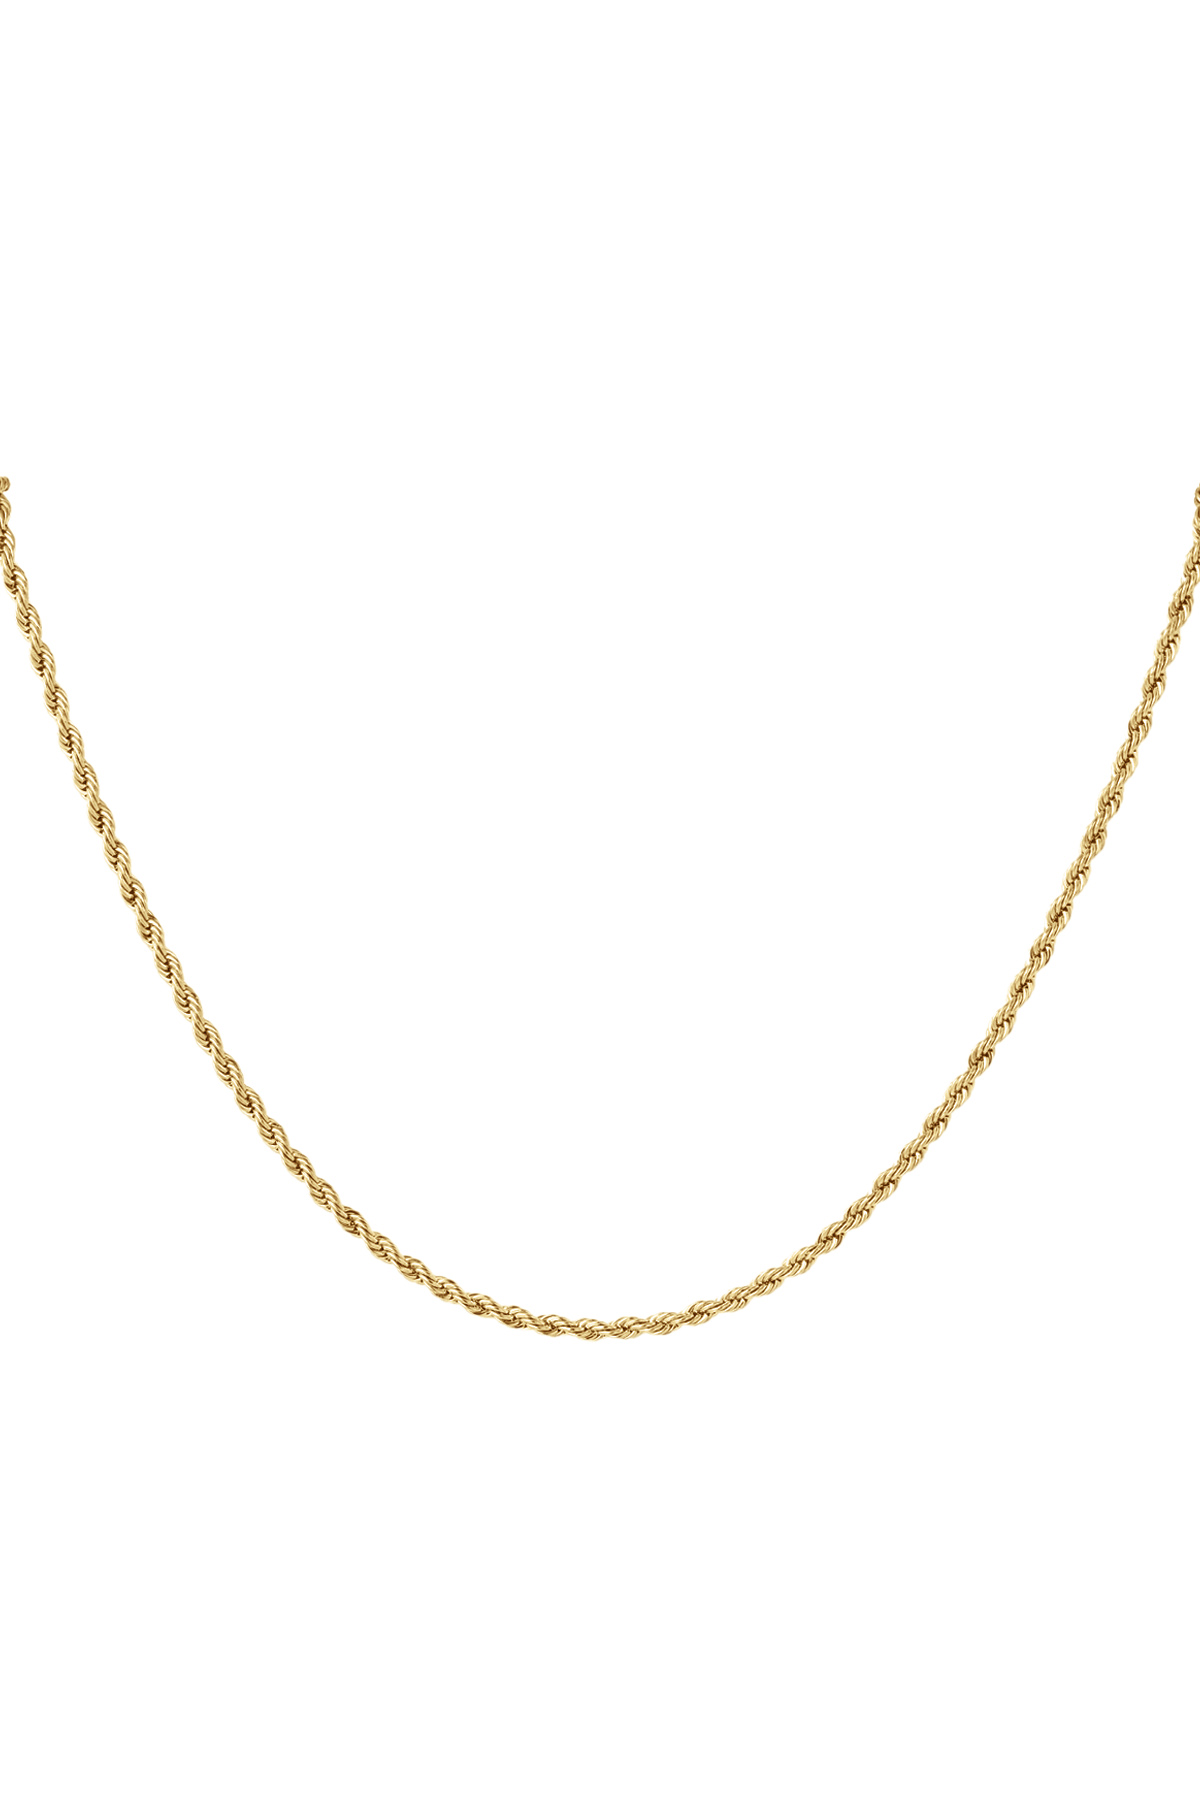 Unisex necklace twisted fine - gold-3.0MM h5 